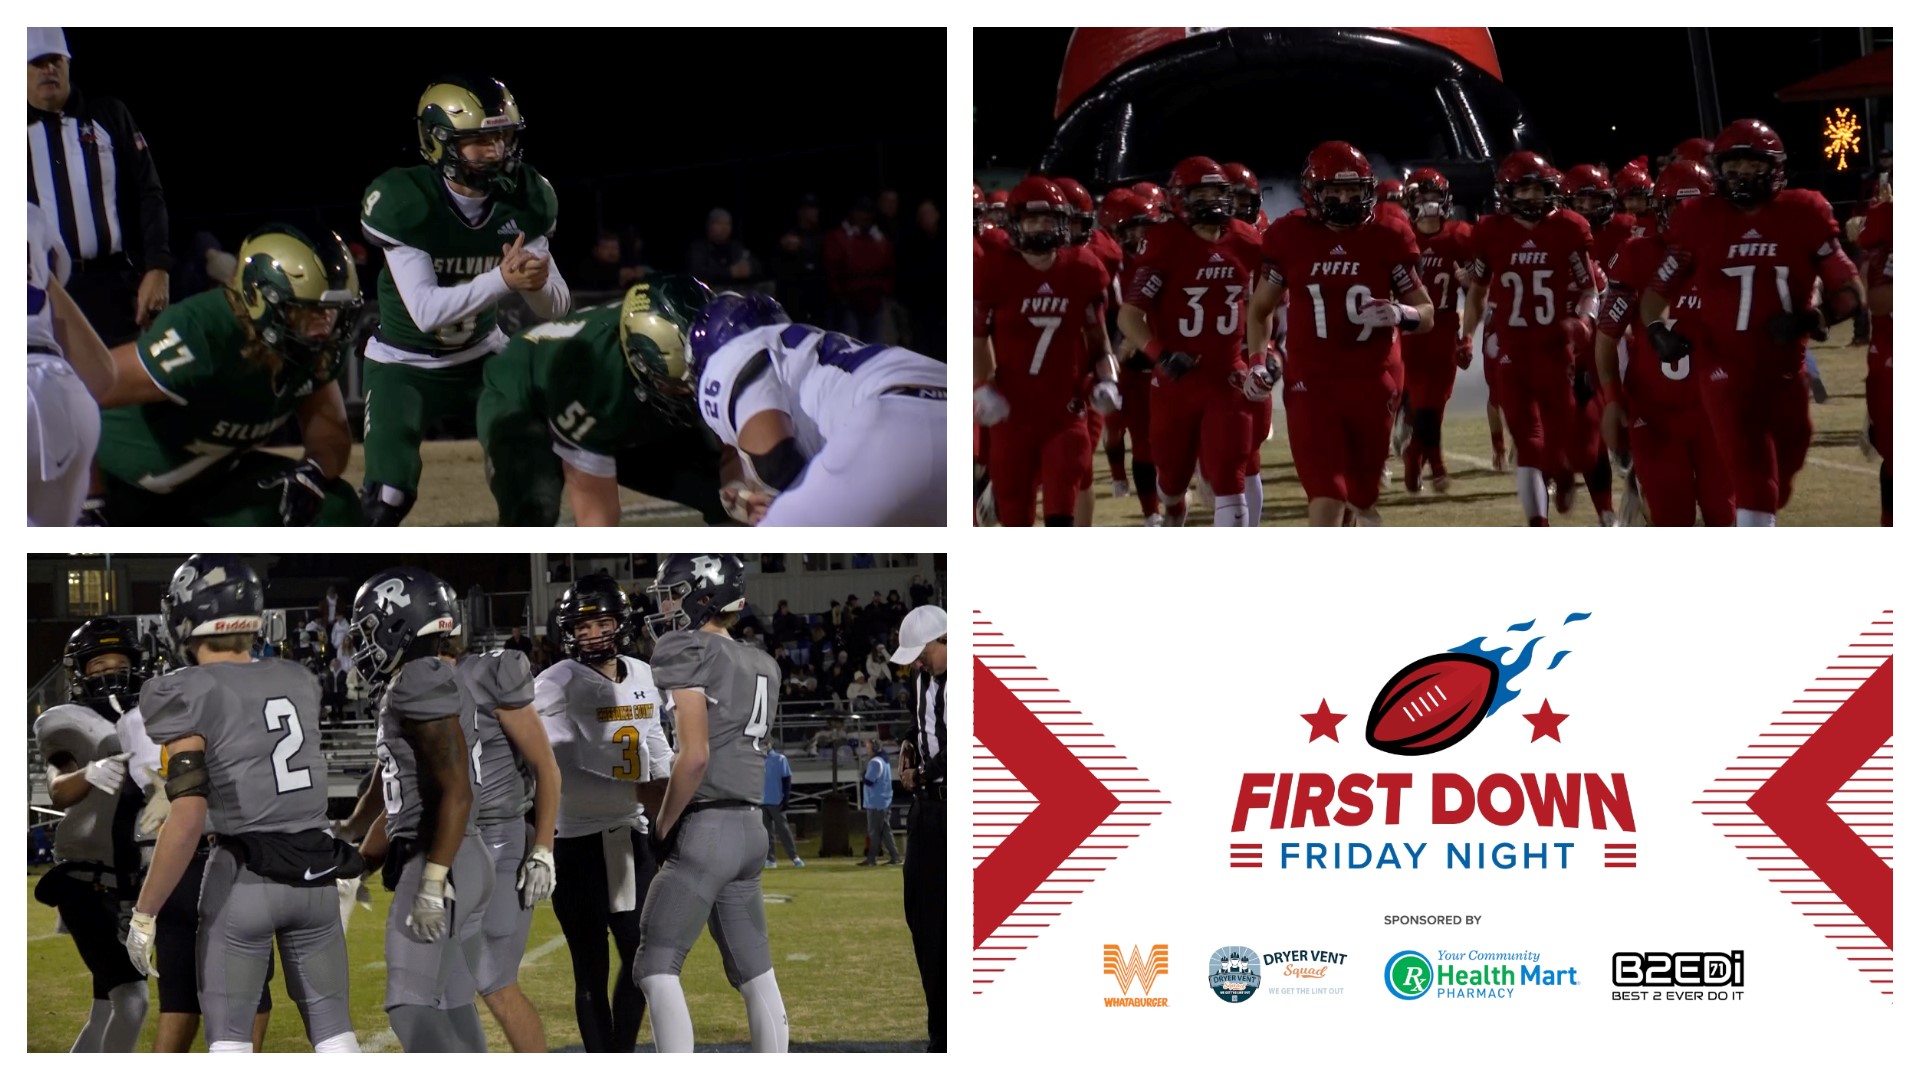 Eight teams from the Tennessee Valley tried to punch their ticket to state semifinals. Check out highlights and scores on the new edition of First Down Friday Night